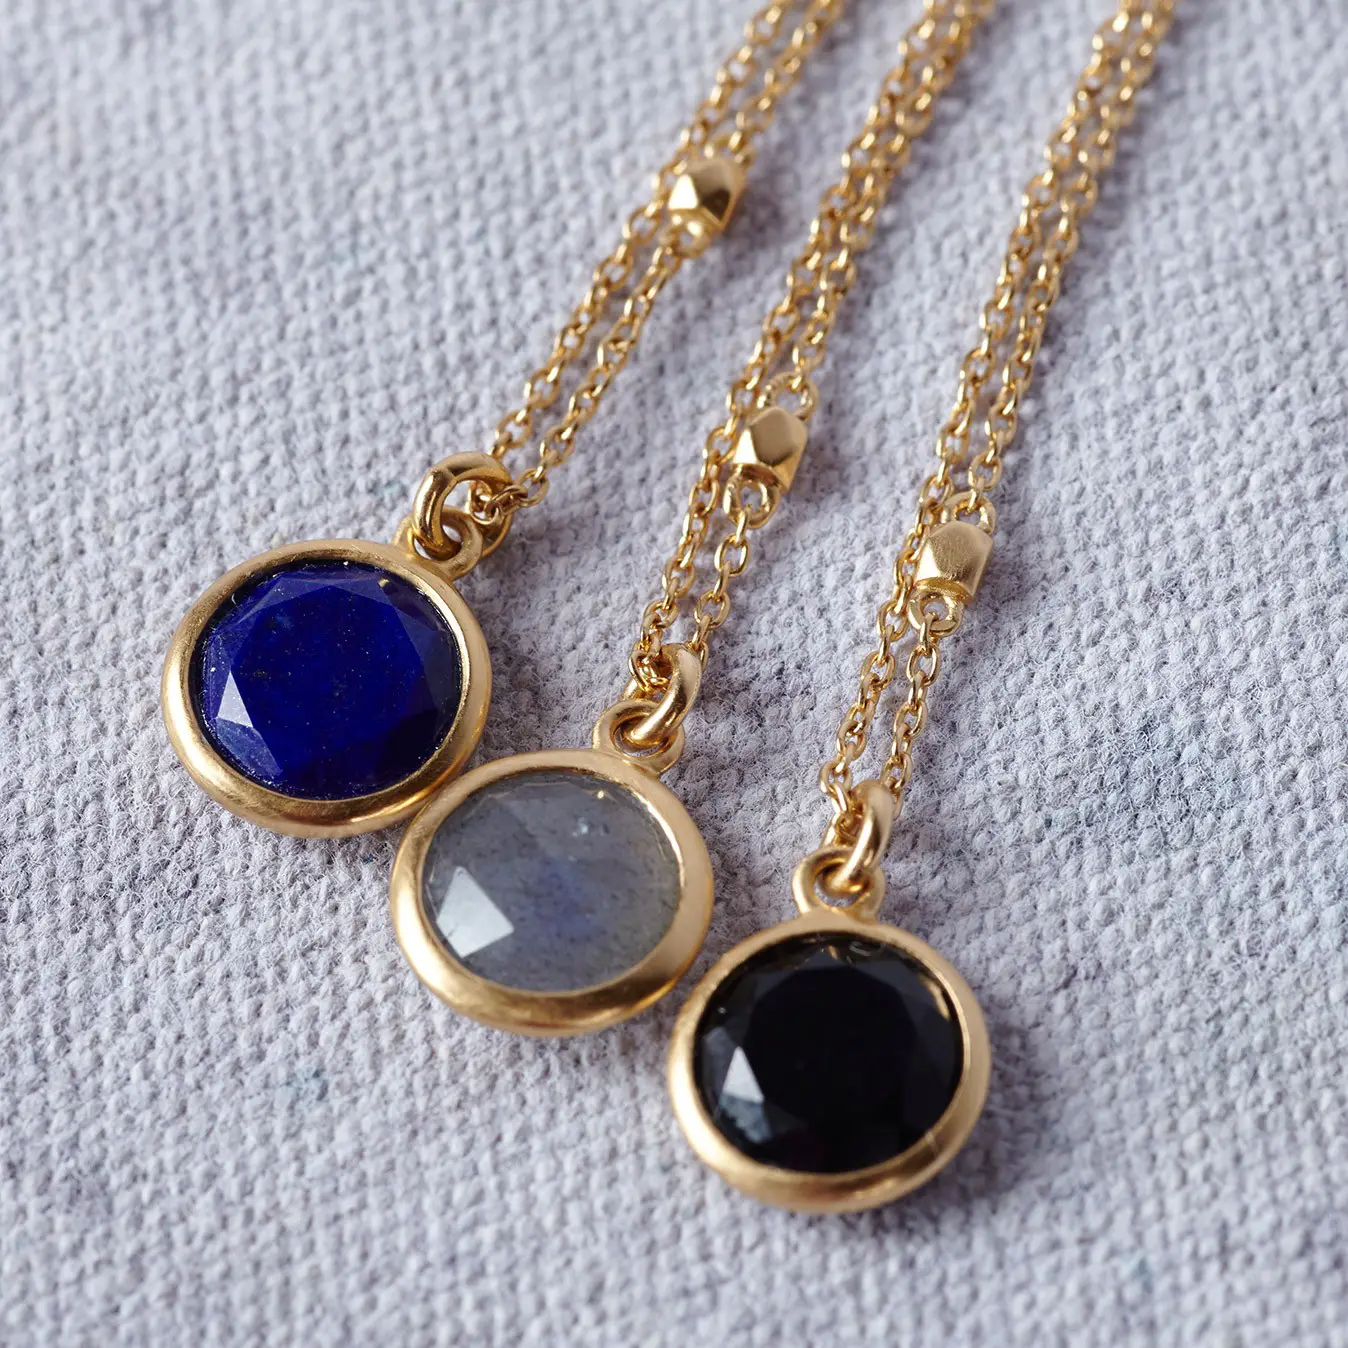 The Duchess of Cambridge's Astley Clarke Round Stilla Lapis Lazuli Pendant Necklace is believed to be a Birthday gift